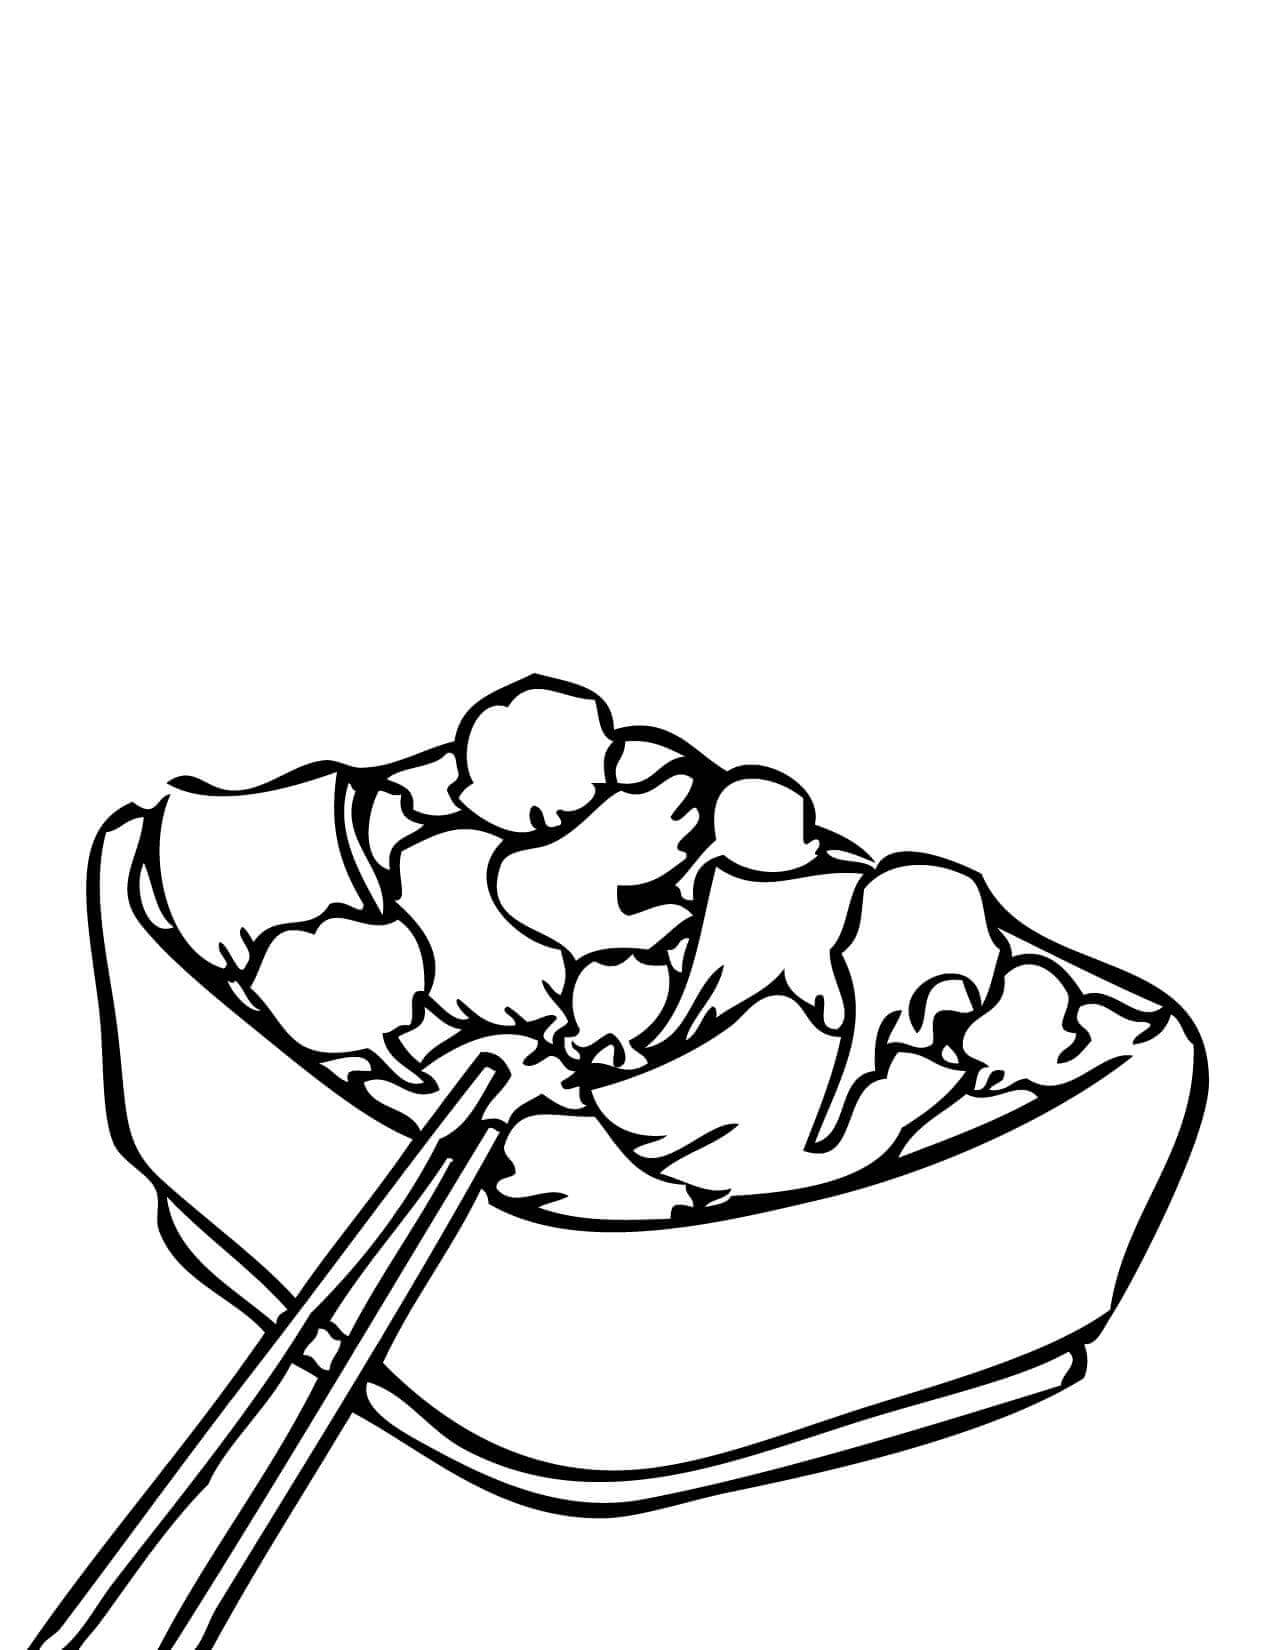 Chinese Food Coloring Pages